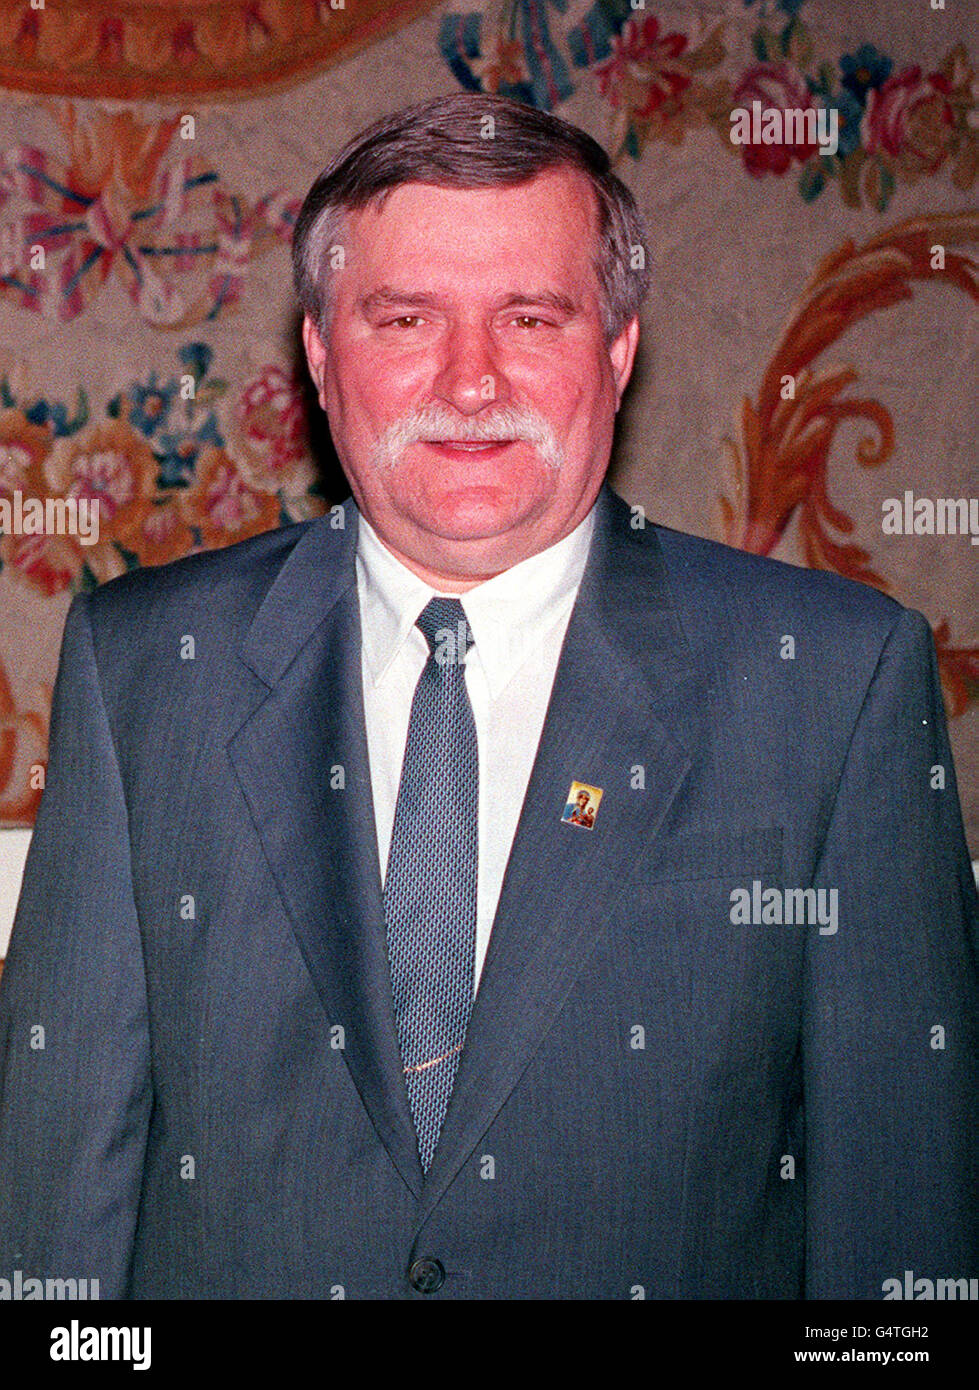 Polish President Lech Walesa at Belvedere Palace, Warsaw, where he greeted the Prince of Wales, who was on a four day offical visit to Poland. Stock Photo